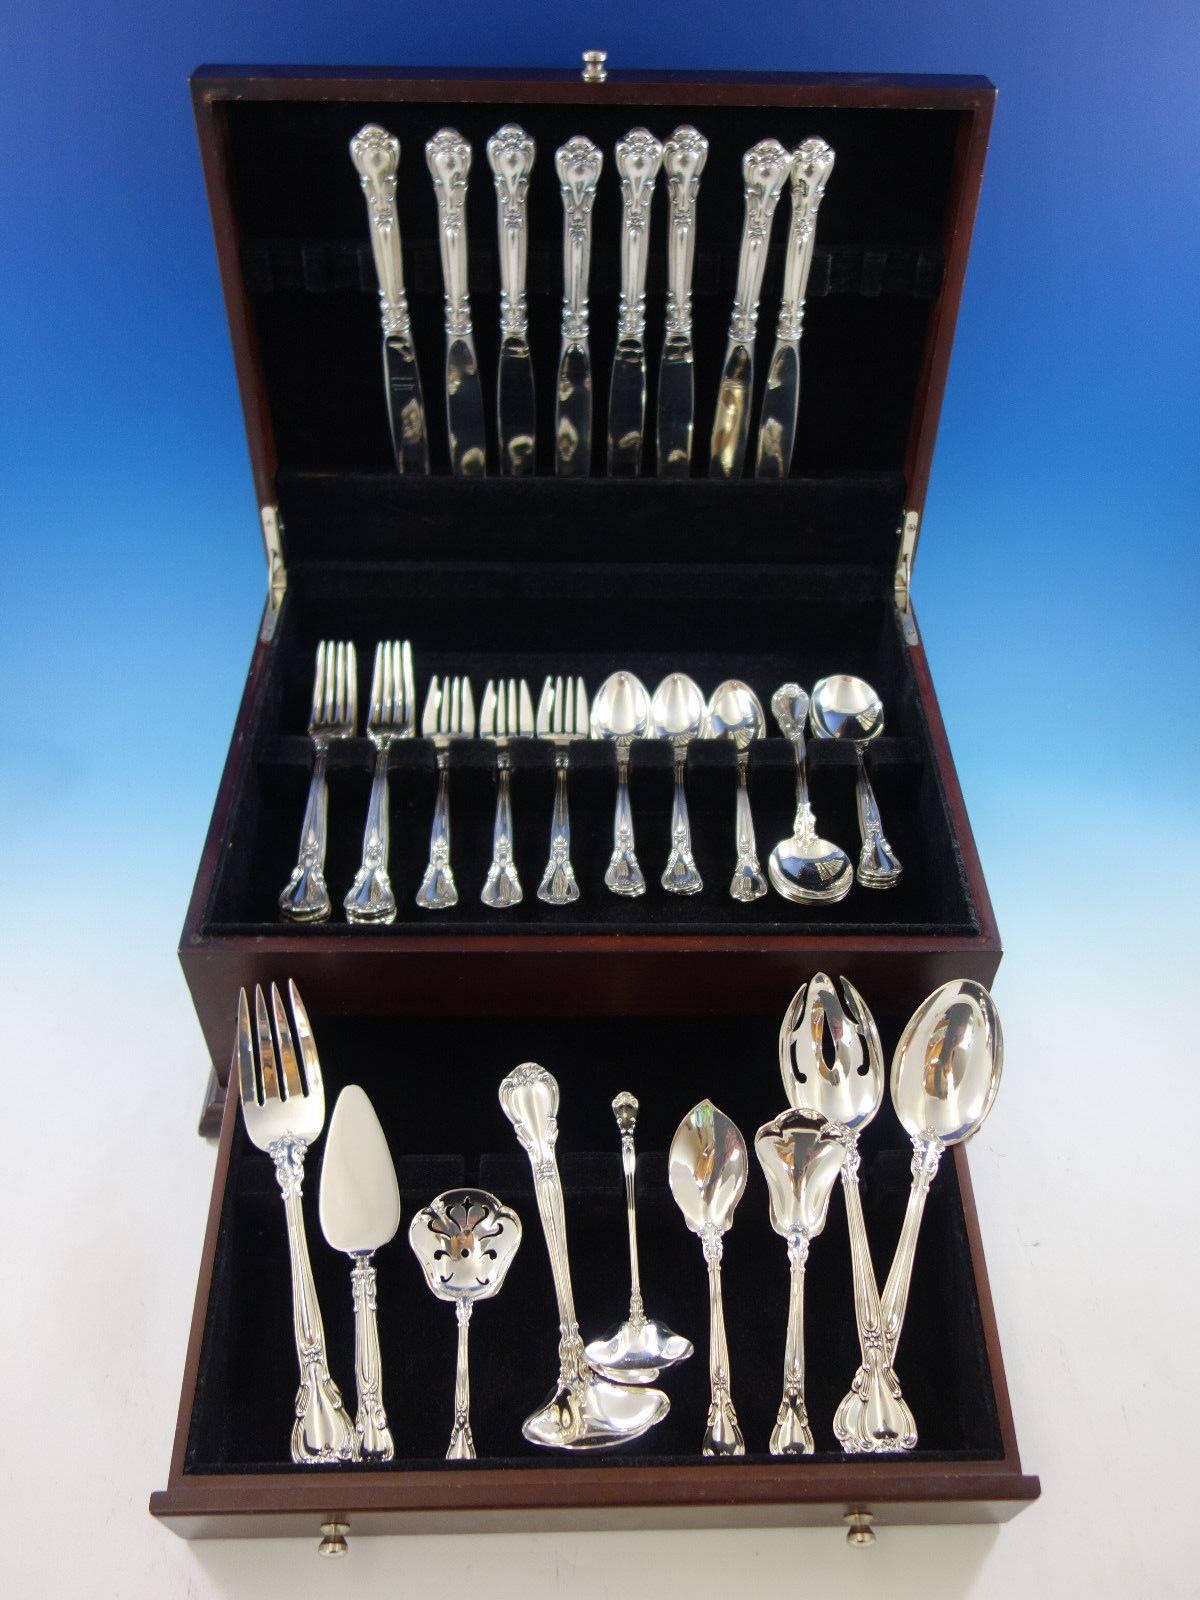 Dinner size Chantilly by Gorham sterling silver flatware set - 49 pieces. This set includes: 

Eight dinner size knives, 9 5/8